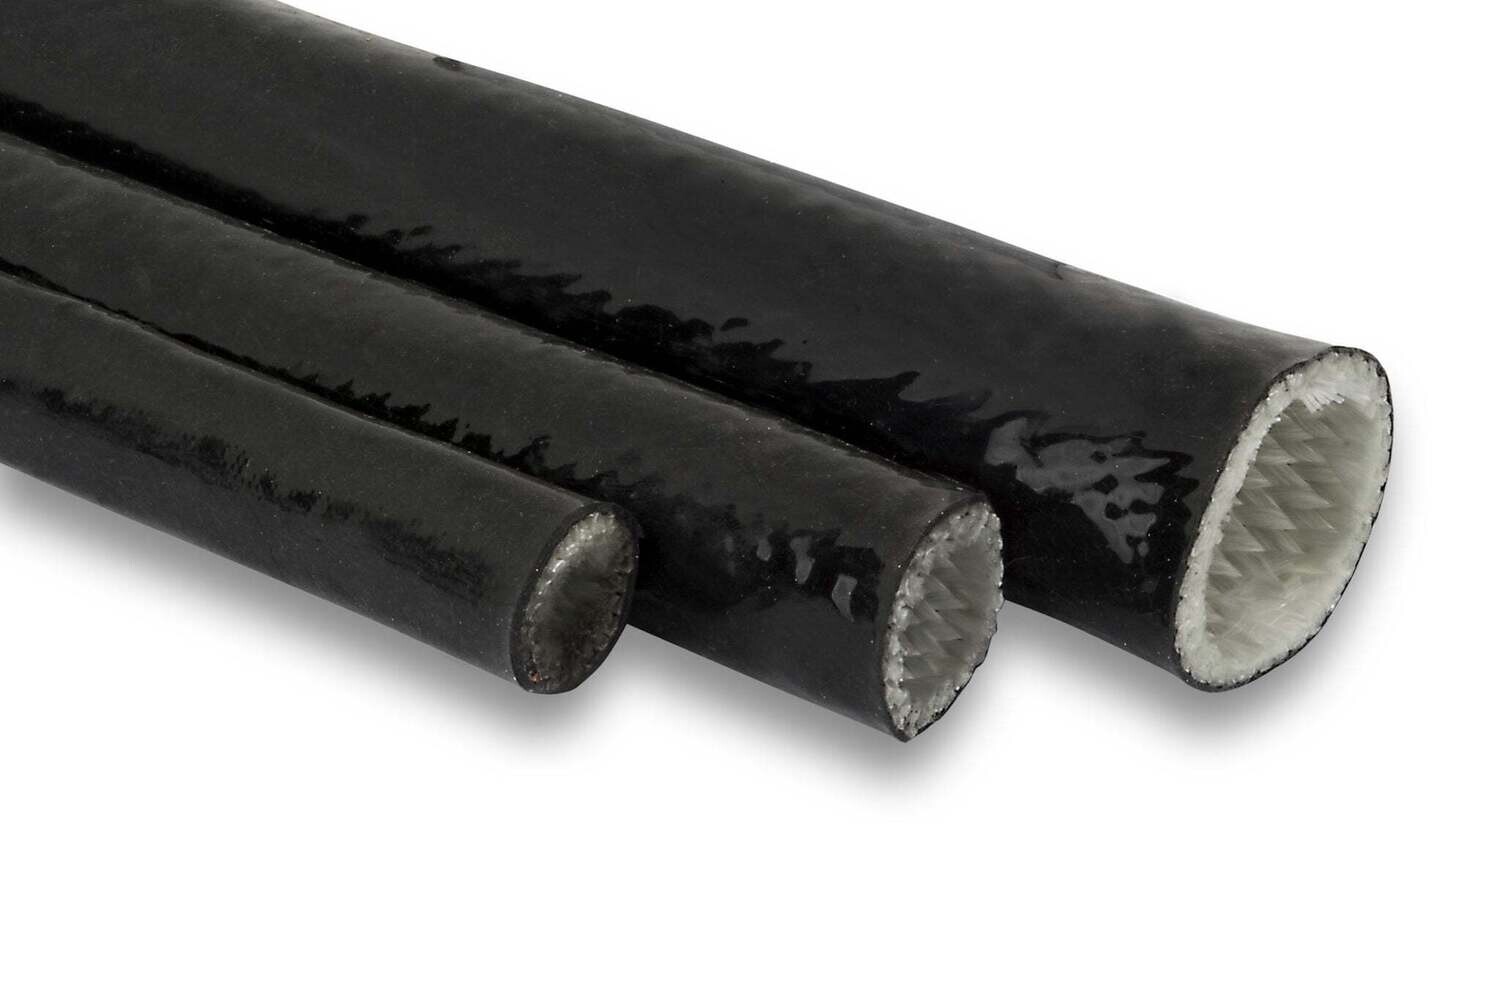 Black Silicon High Heat Sleeve - 25mm, 1.0m Multiple Qty will come on a continuous Roll